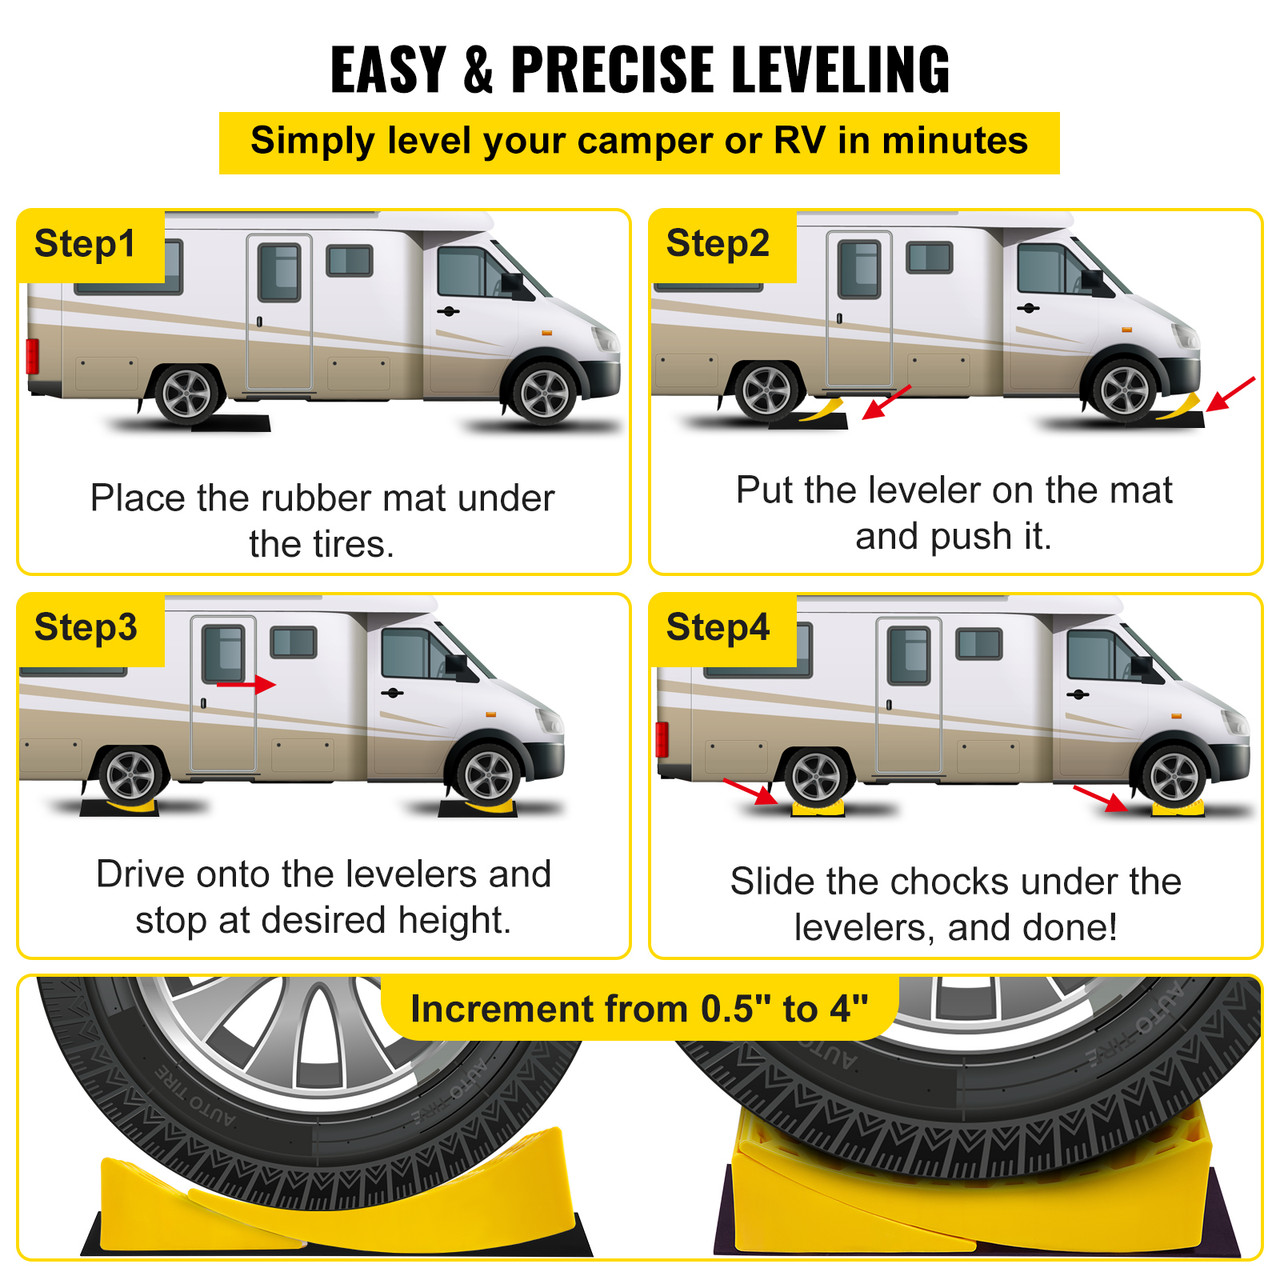 Camper Leveler, 2 Pack RV Leveling Blocks, HDPE Curved Levelers,Include 2 Curved Levelers,2 Chocks,2 Rubber Grip Mats,Hold up to 35000 lbs,Fast and Precise Leveling for Camper RV Trailer